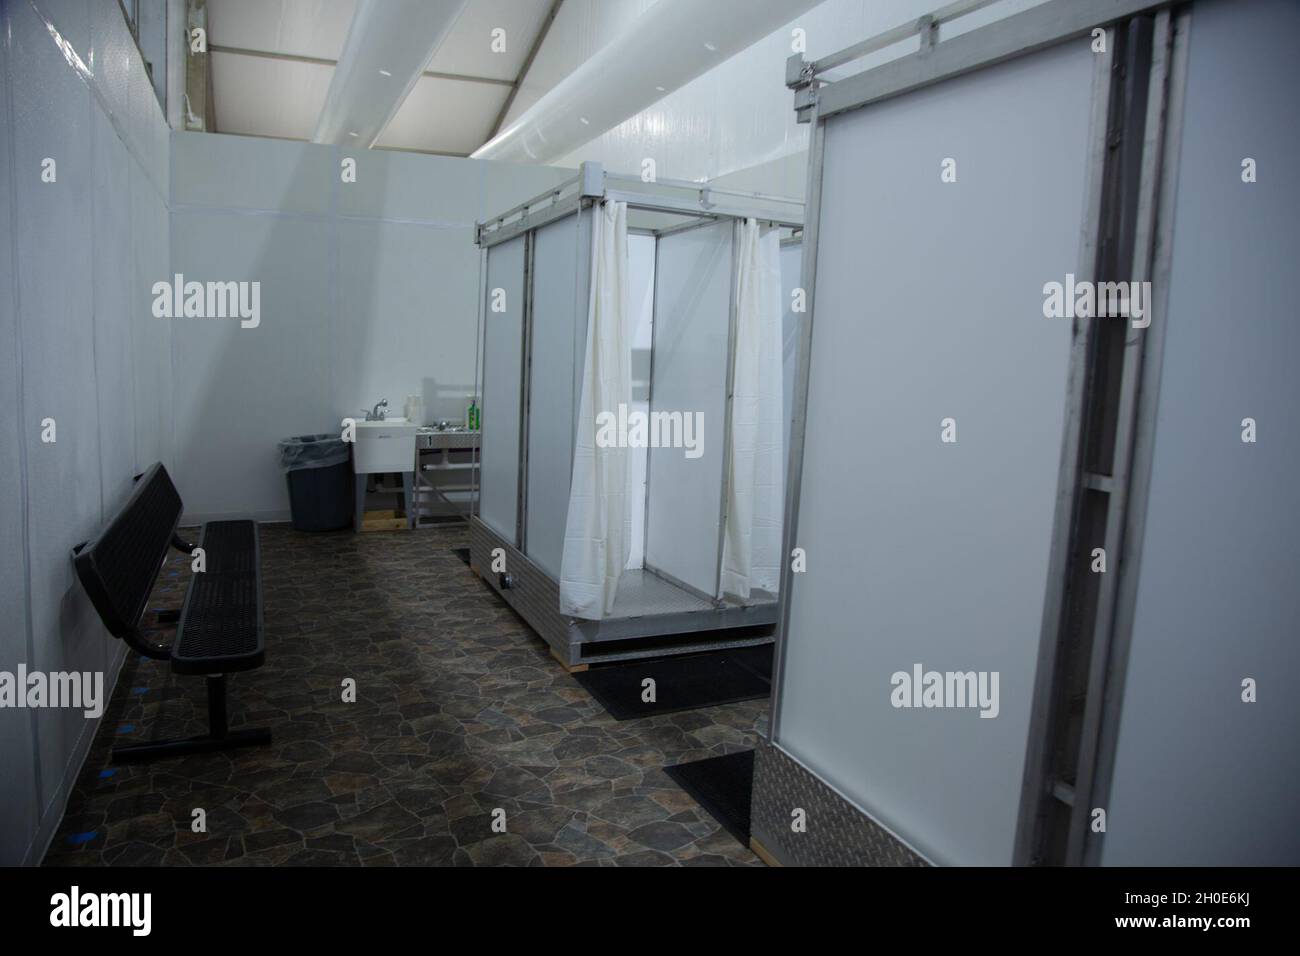 Temporary processing facilities are constructed in Donna, Texas, Feb. 8, 2021, to safely process individuals encountered by, and in the custody of, the U.S. Border Patrol. The facility will provide processing capacity in the RGV while the permanent Centralized Processing Center in McAllen is renovated. U.S. Border Patrol Stock Photo